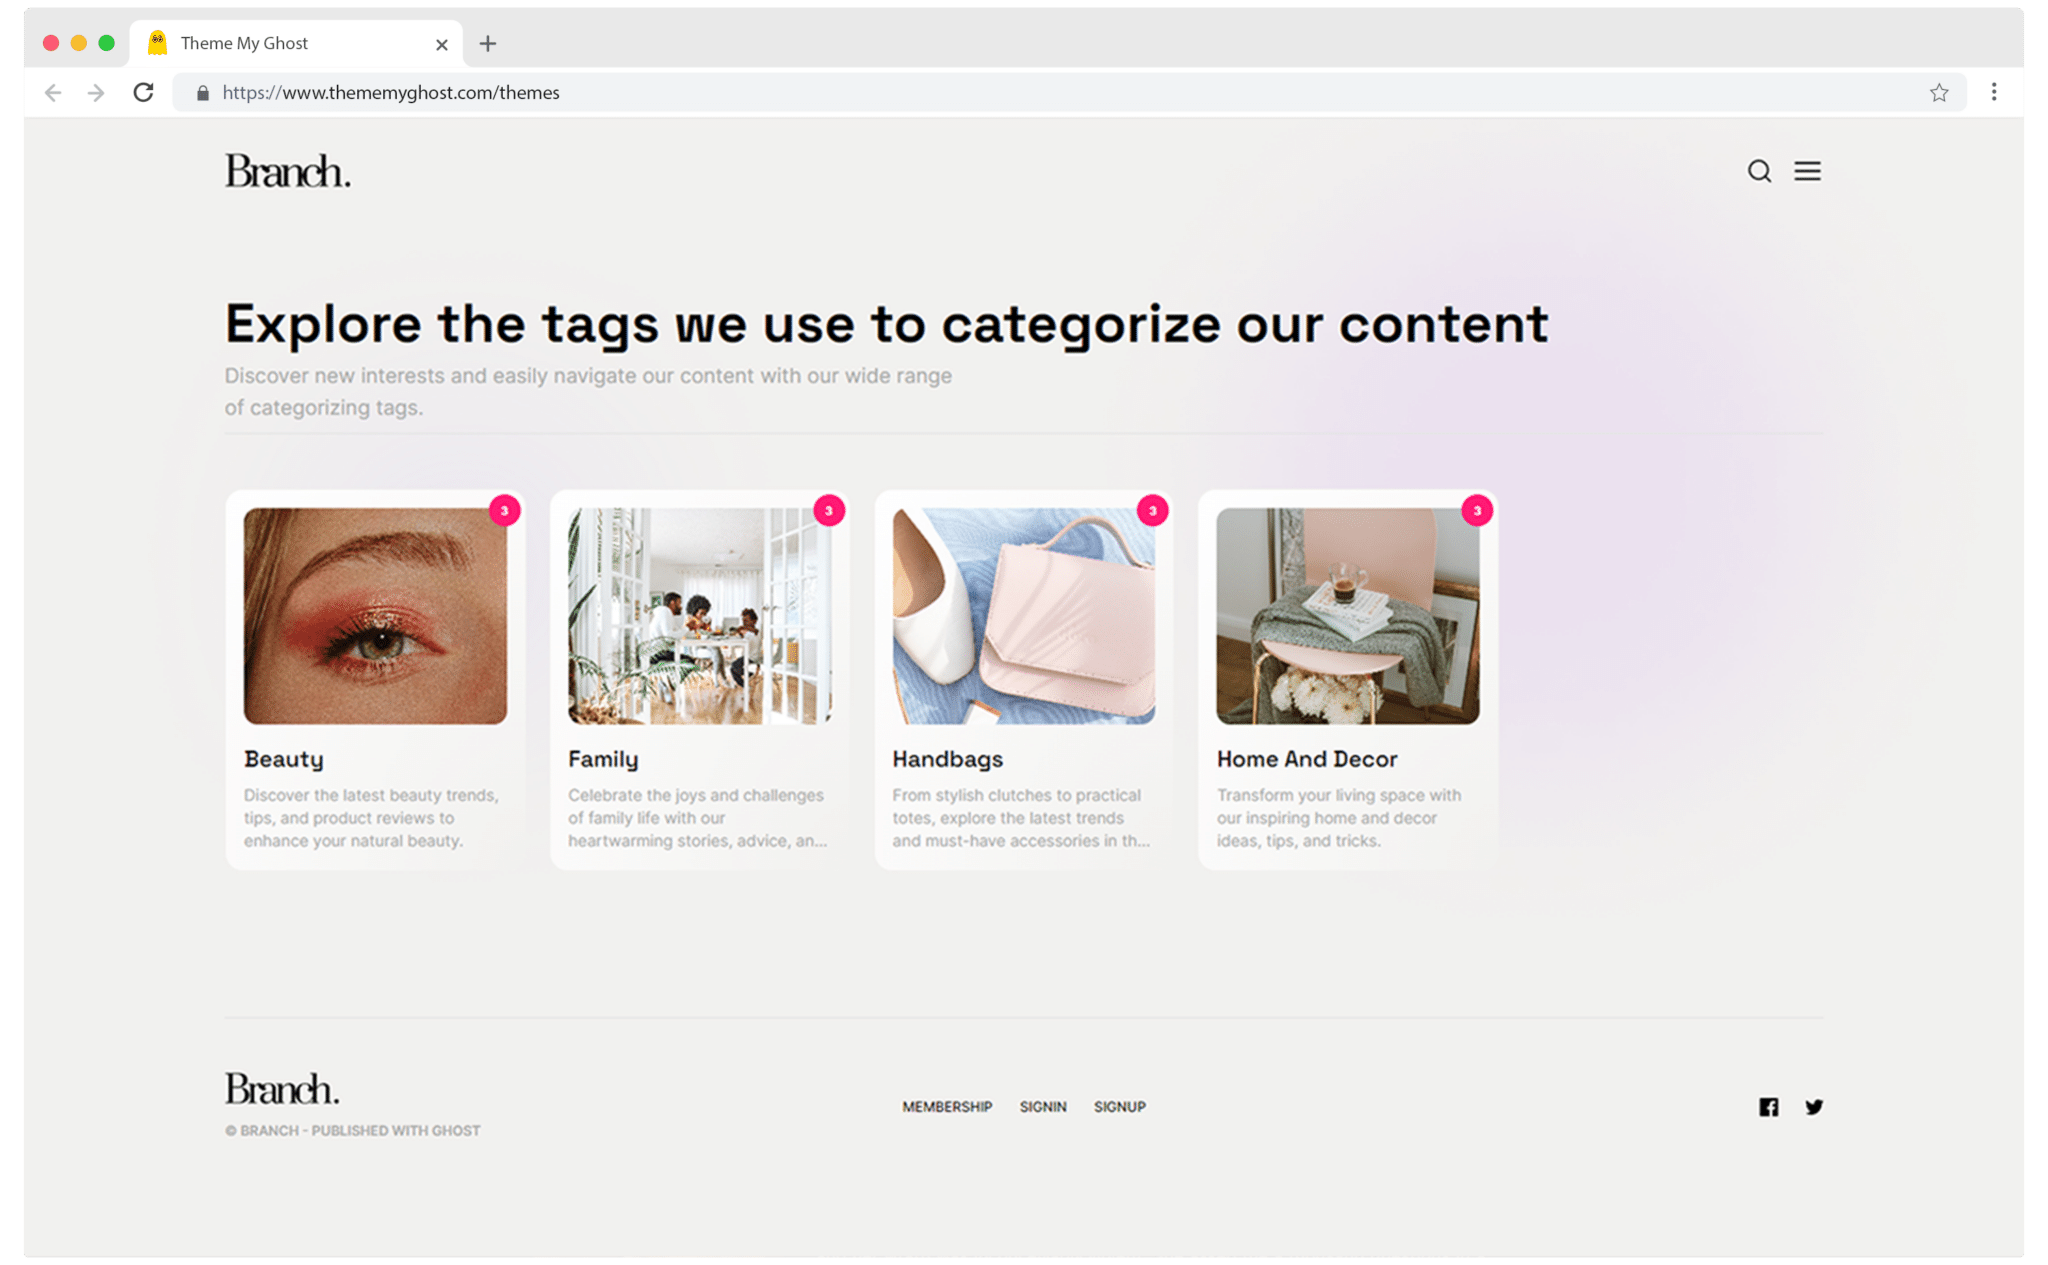 Branch is a Premium Ghost theme for magazine layout with Custom Sign In and Membership pages 6 1